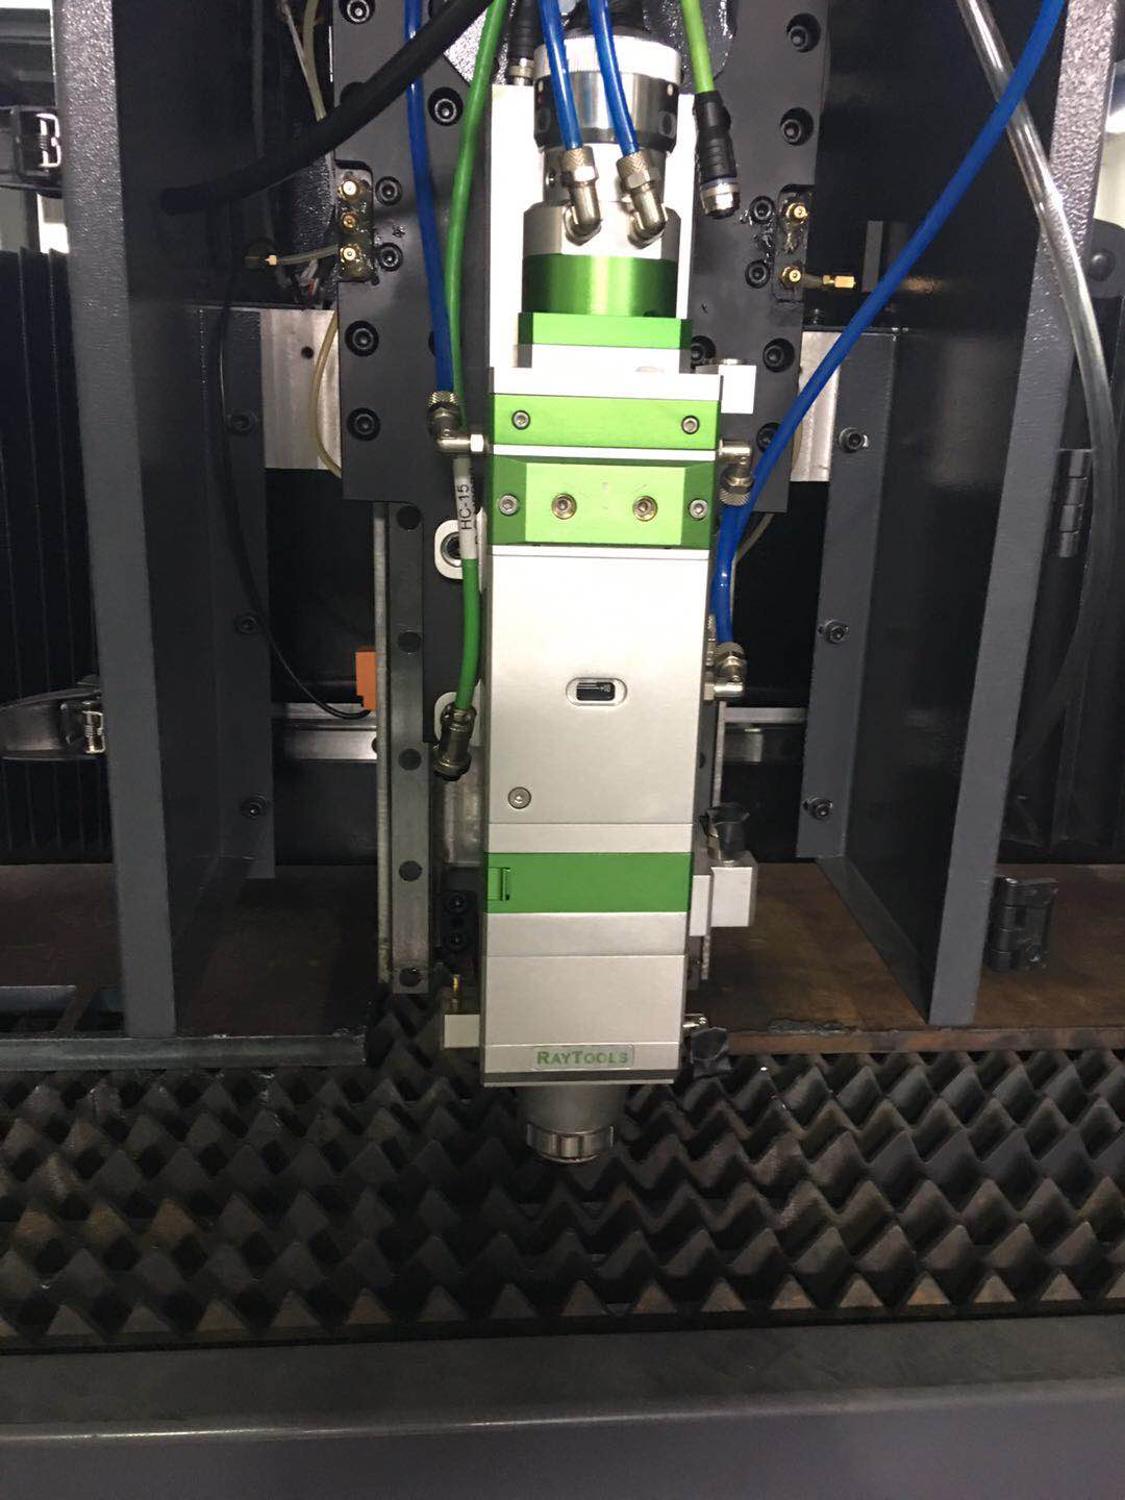 Raytools BM114s 6kw laser head Automatically cut plates of different thicknesses and materials